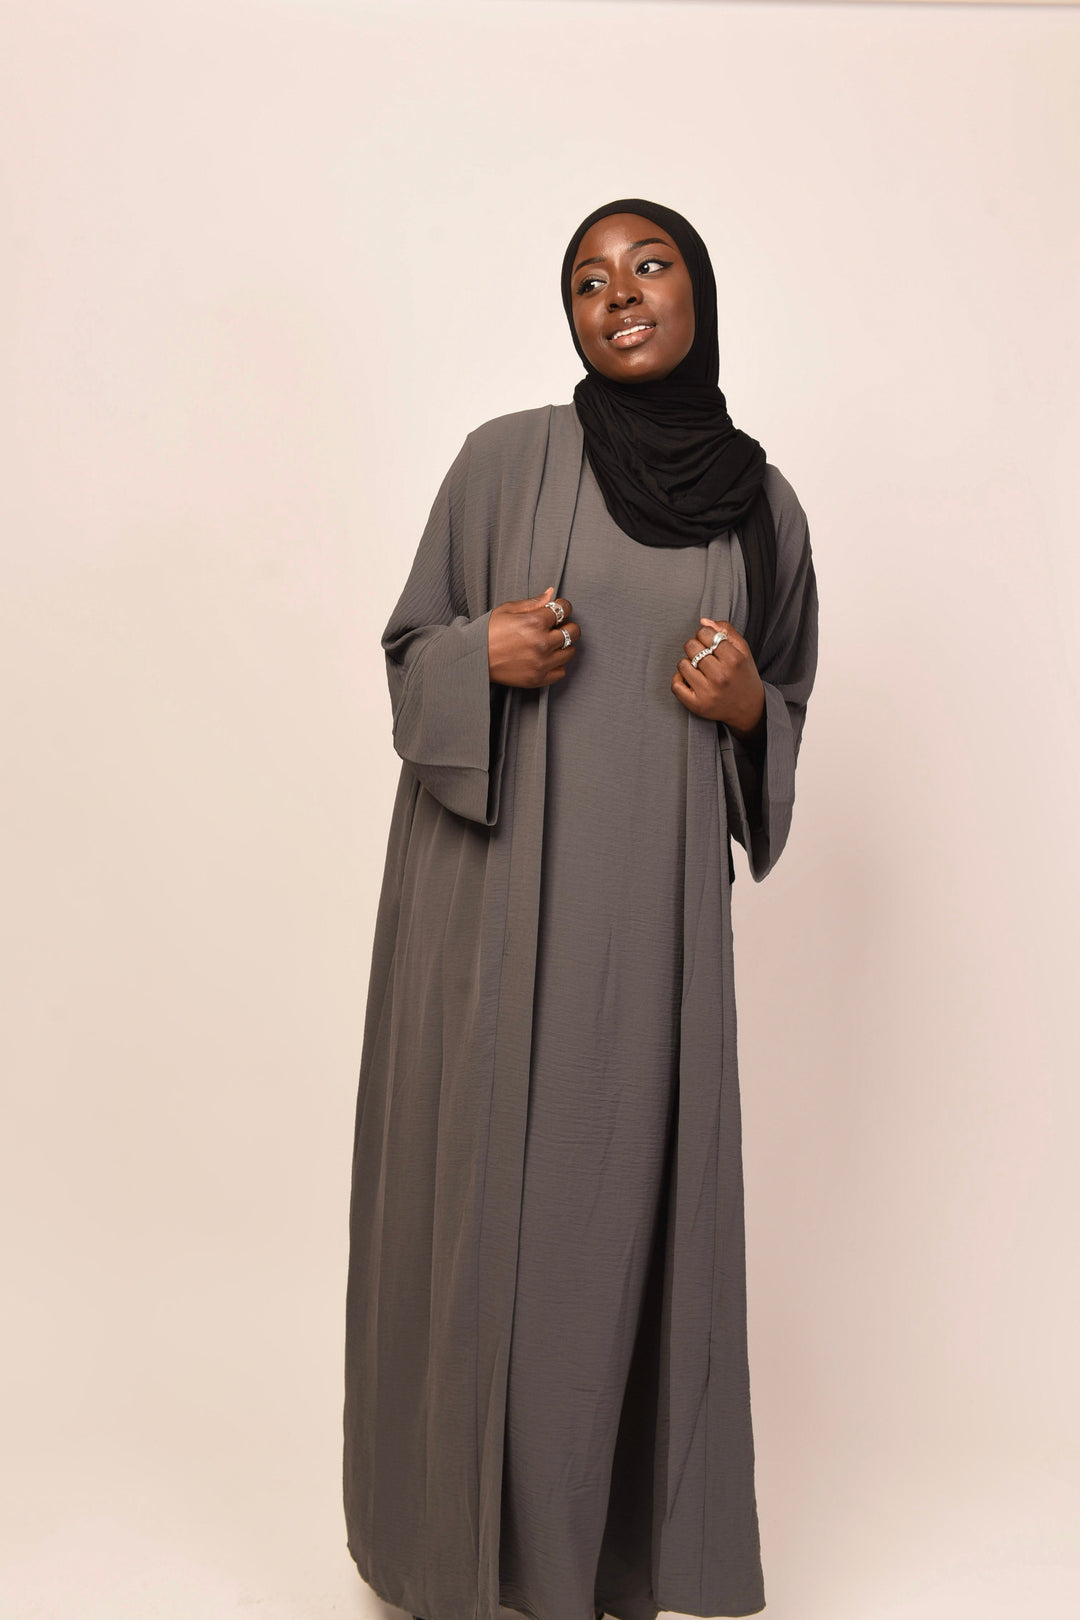 Get trendy with Lea 2-Piece Abaya Set - Gray (As is) -  available at Voilee NY. Grab yours for $54.90 today!